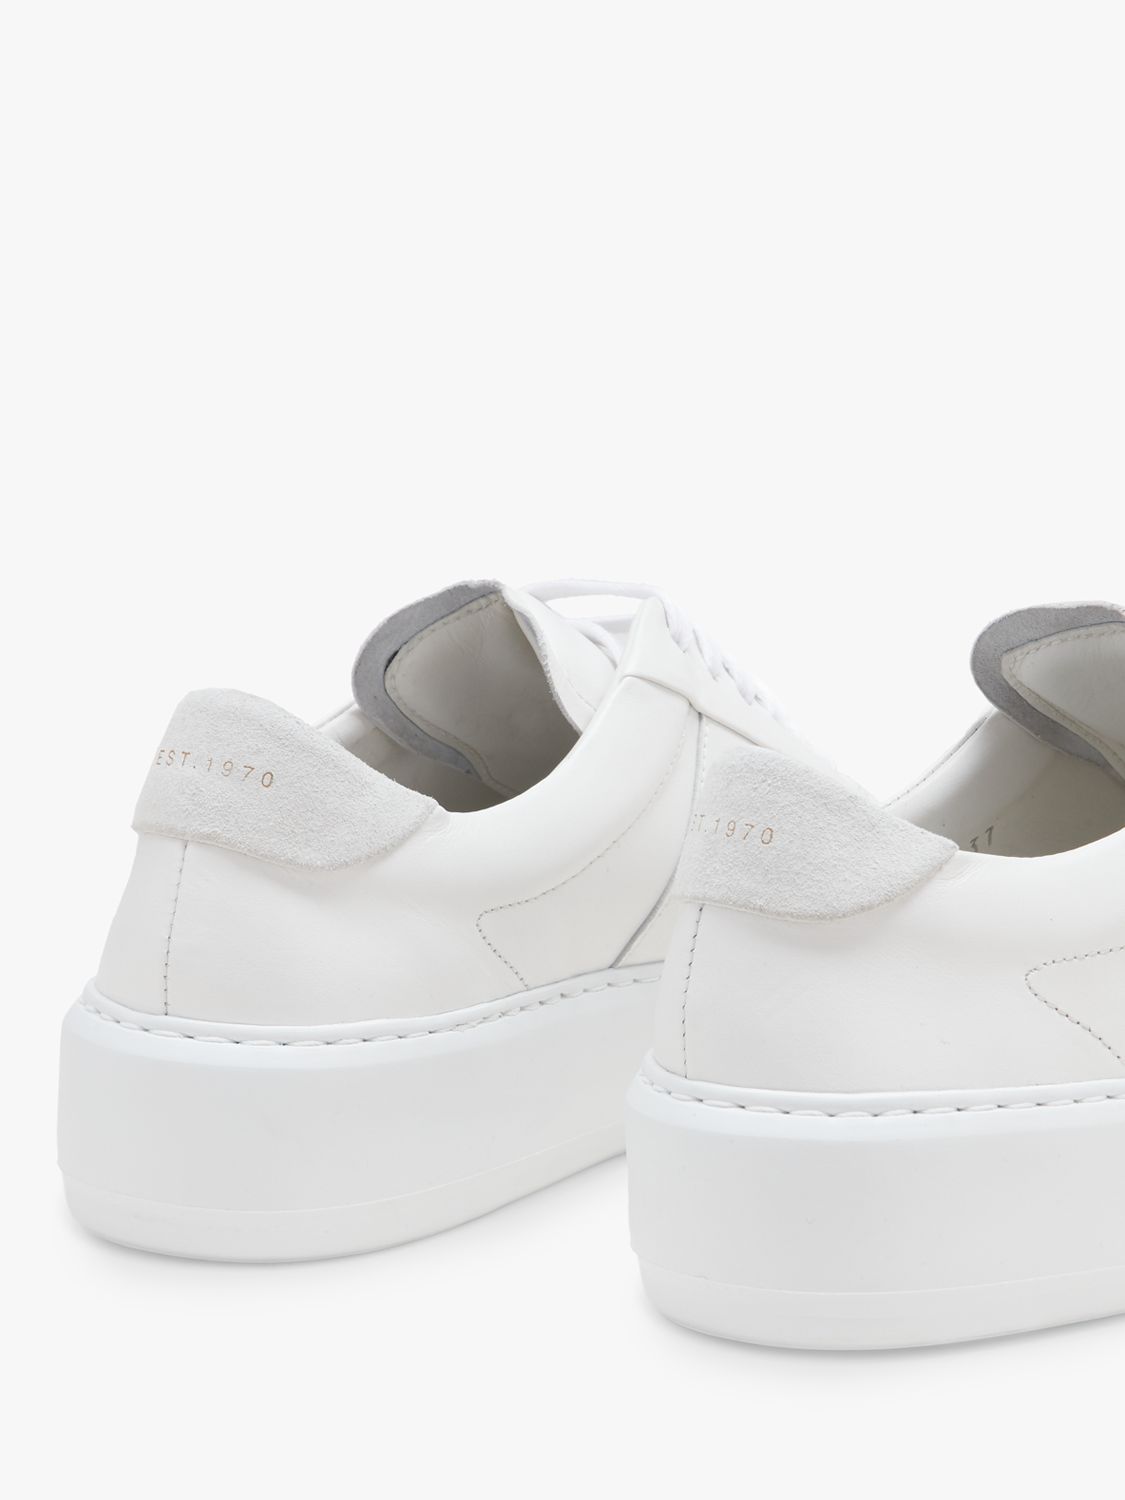 Jigsaw Riva Leather Platform Trainers, White at John Lewis & Partners